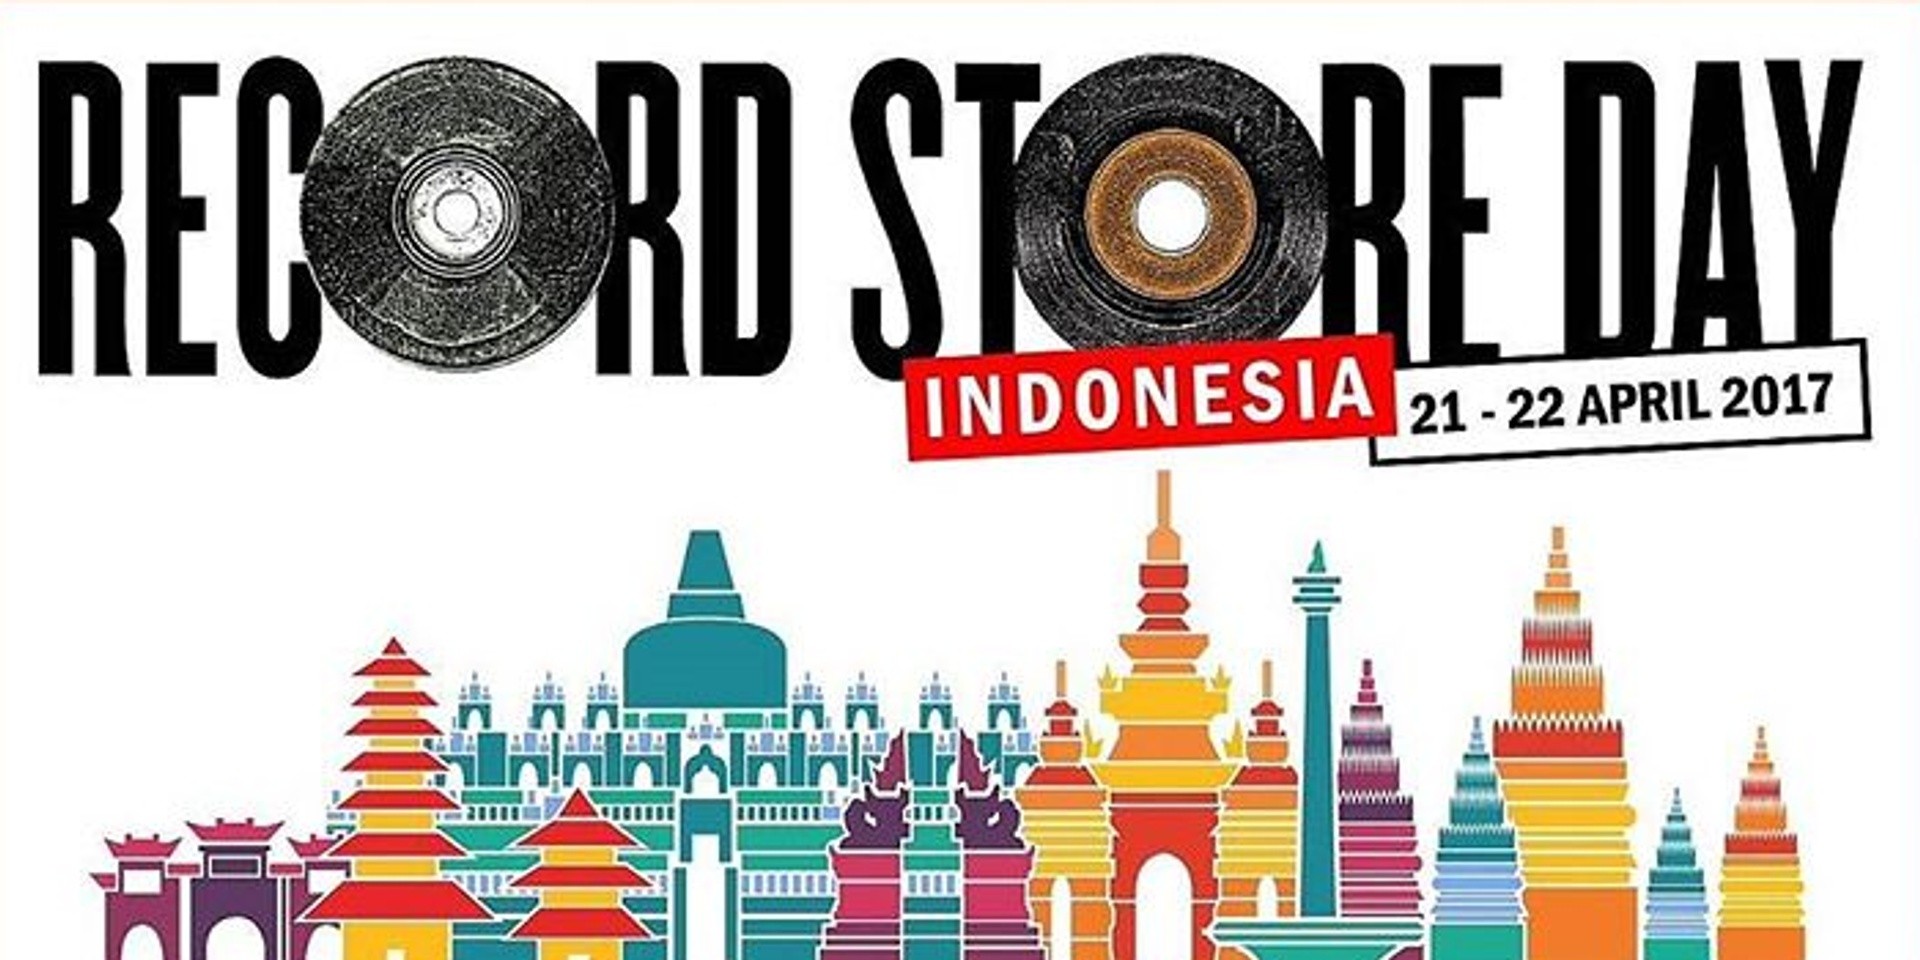 Record Store Day Indonesia 2017 will serve new atmosphere